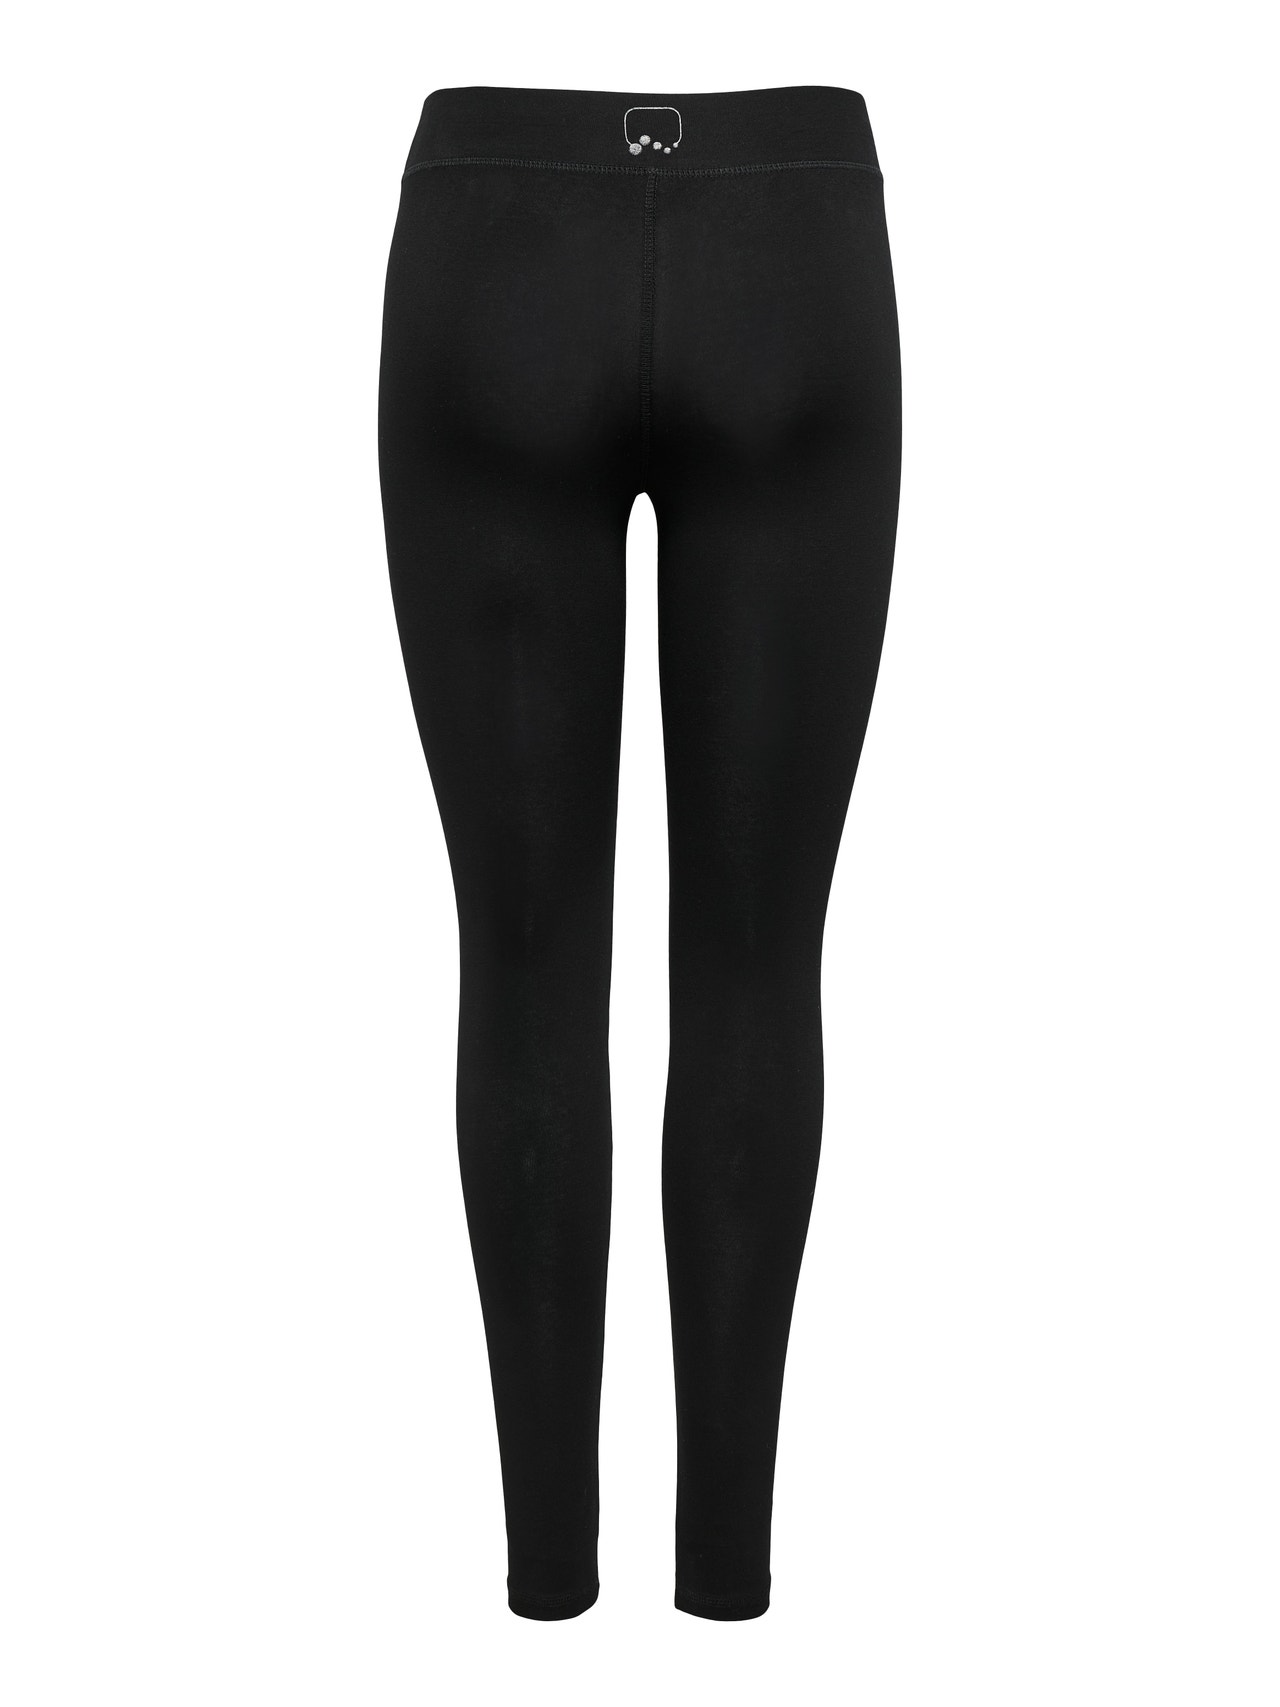 ONLY Training tights -Black - 15200077